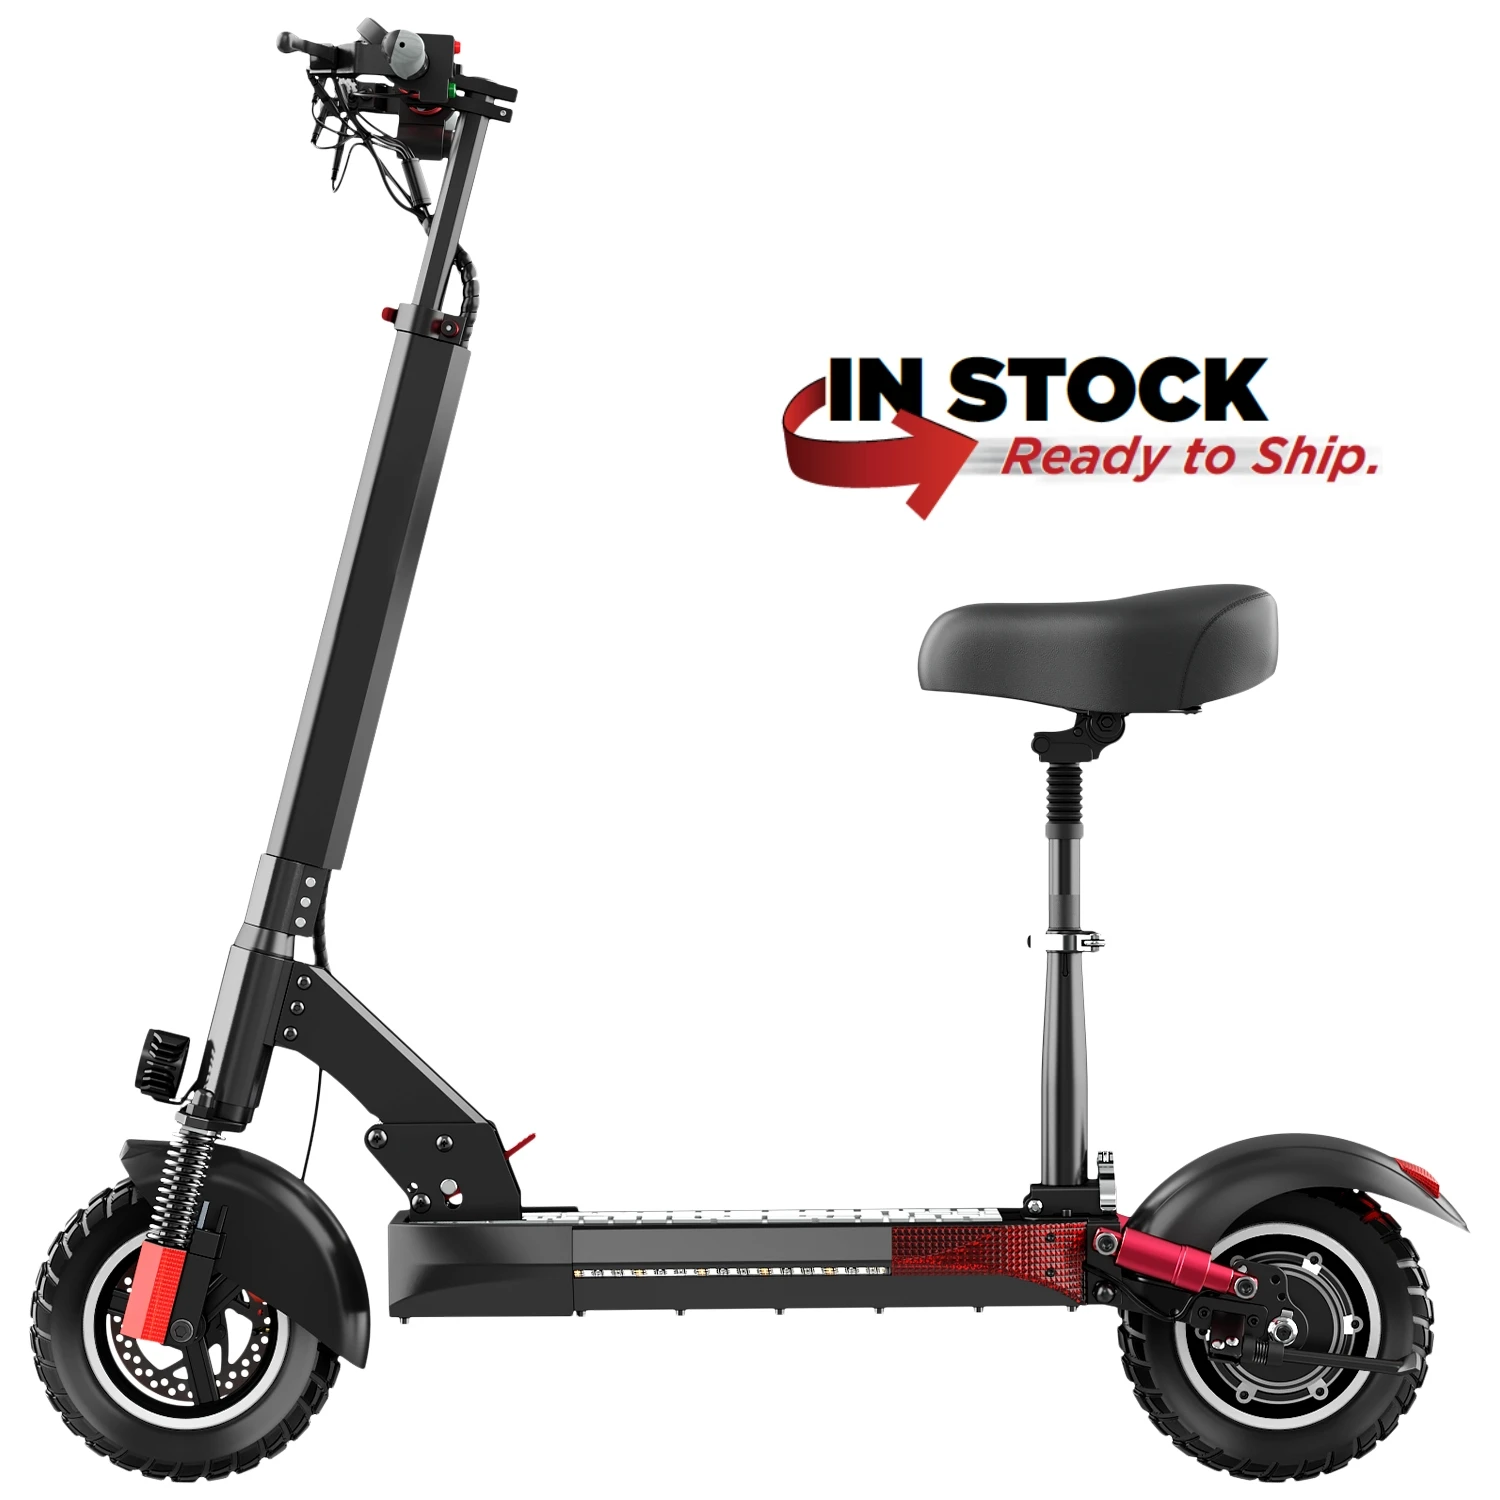 

Top quality 800w 48V electric scooter 45 km/h fast speed 800w small scooter No.1 quality in stock in EU warehouse